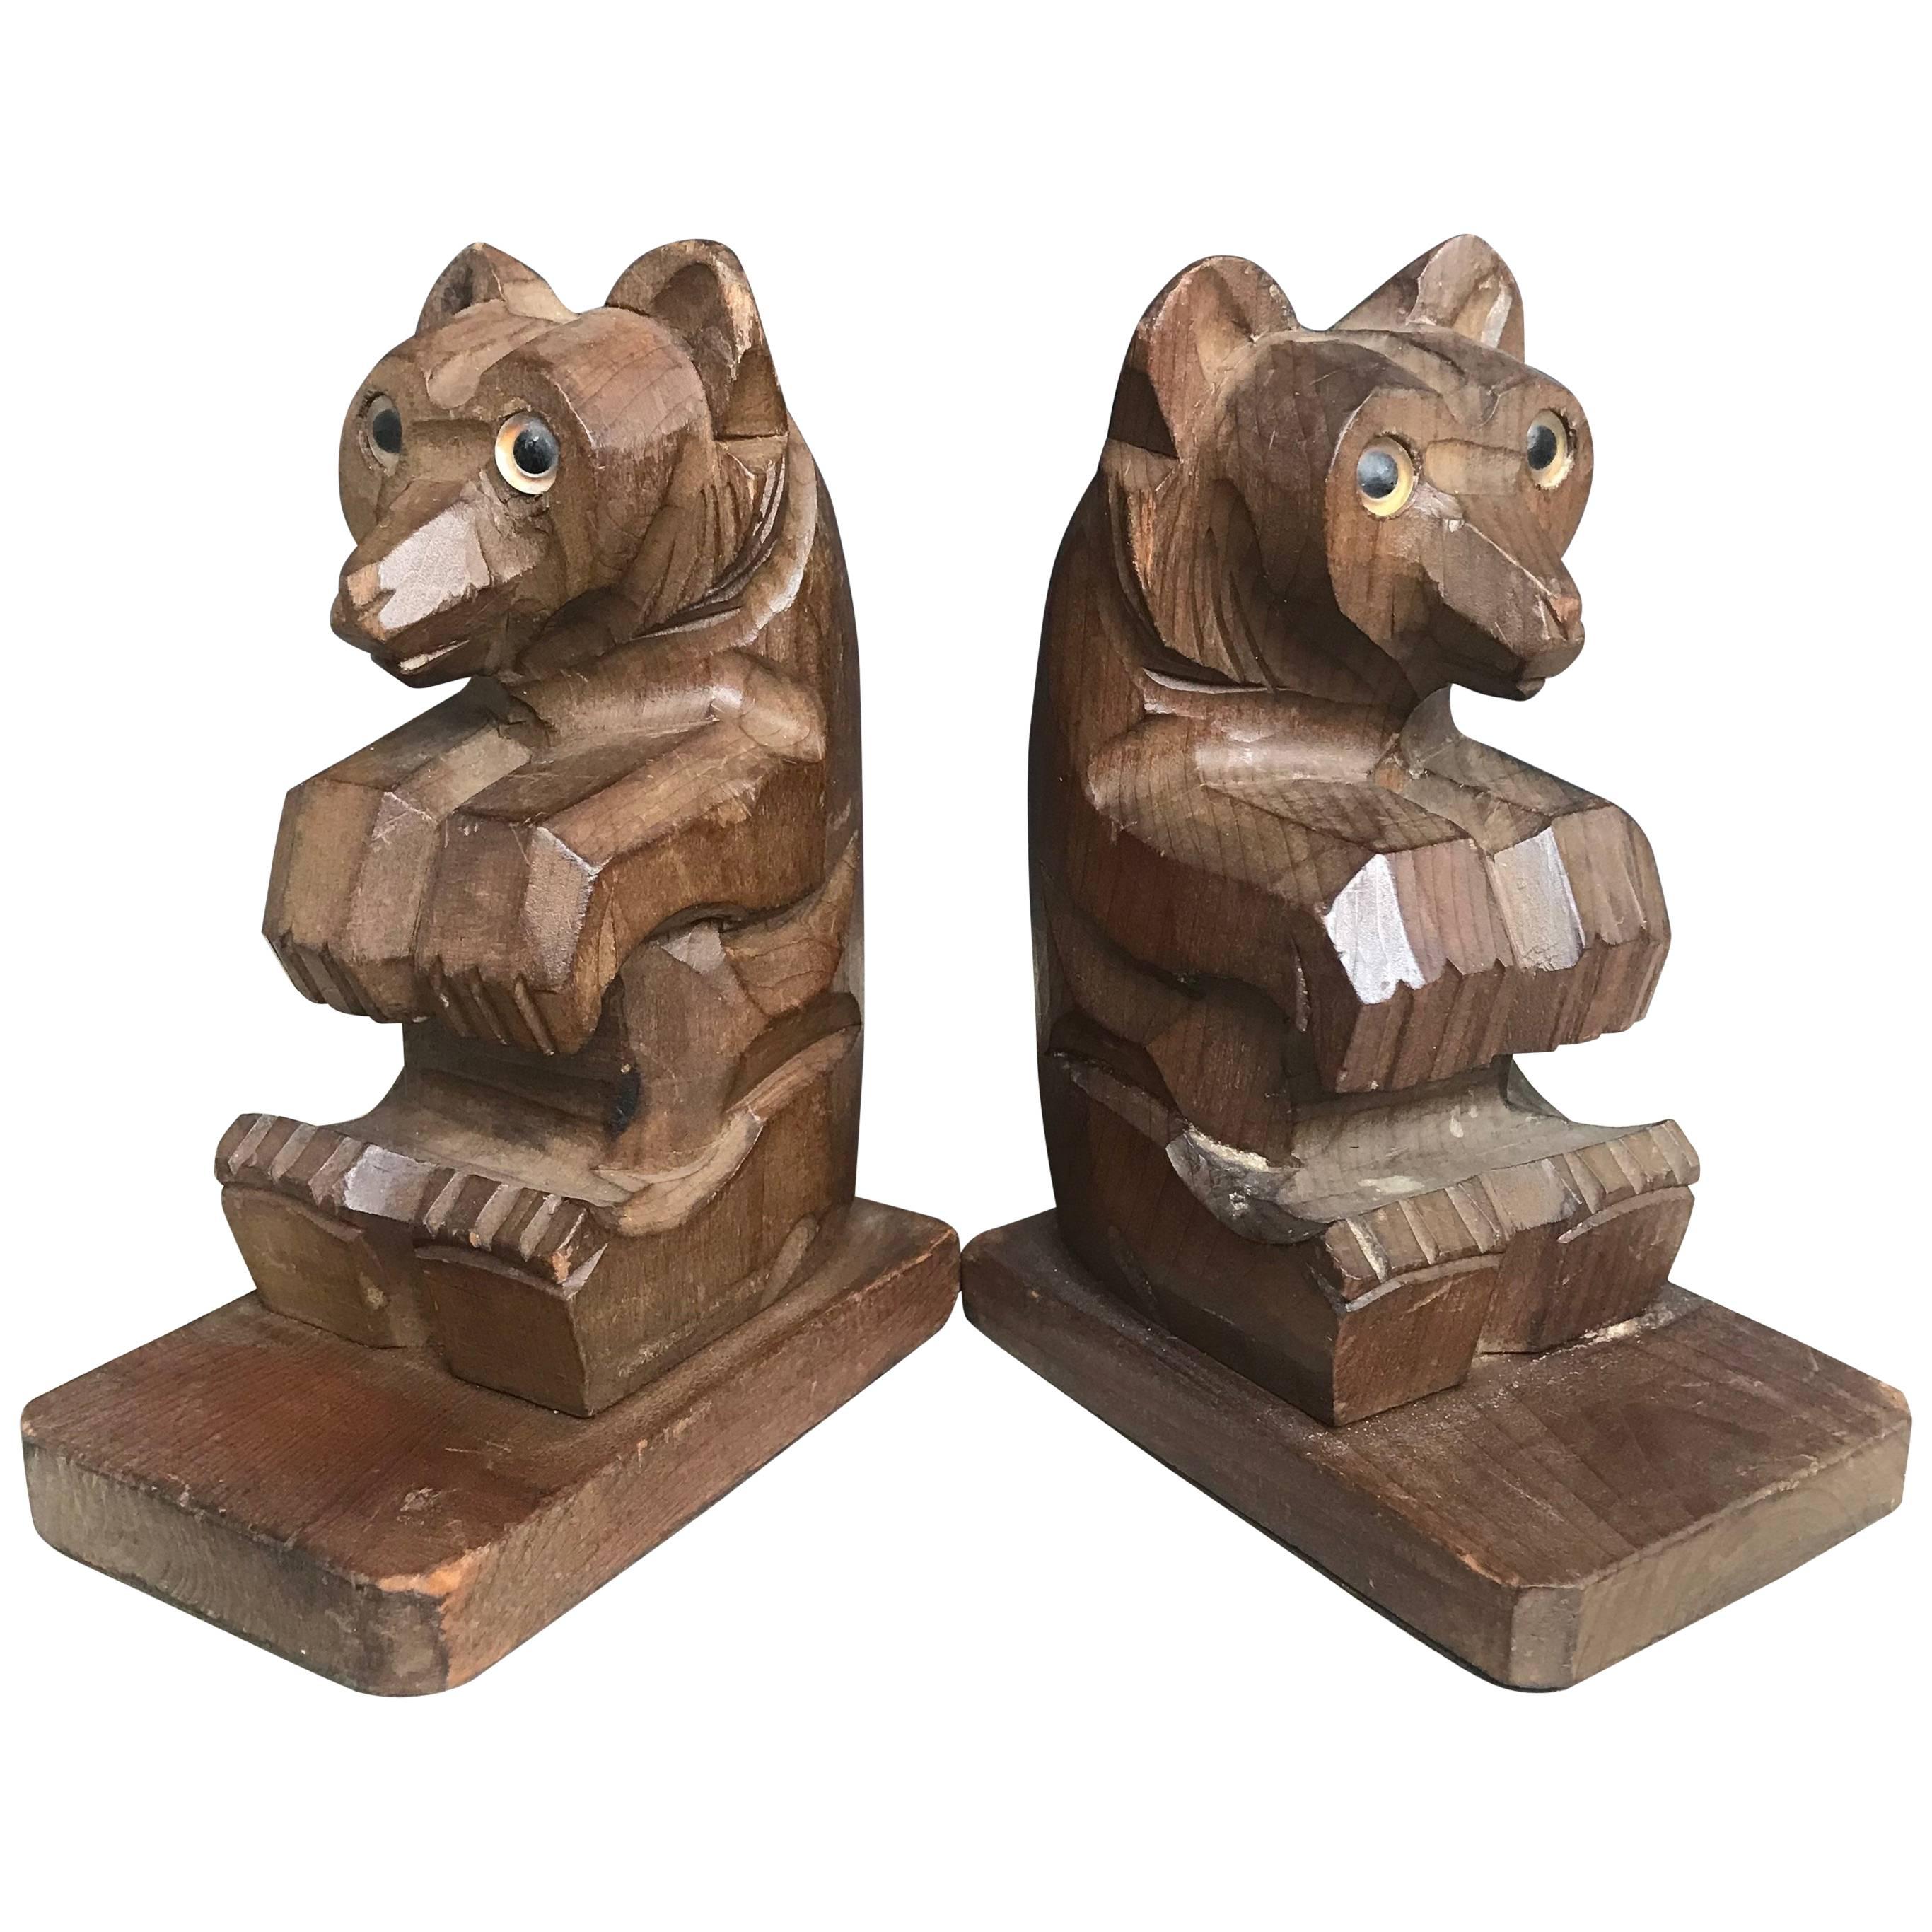 Highly Decorative Pair of Hand-Carved Art Deco Era, Wooden Sitting Bear Bookends